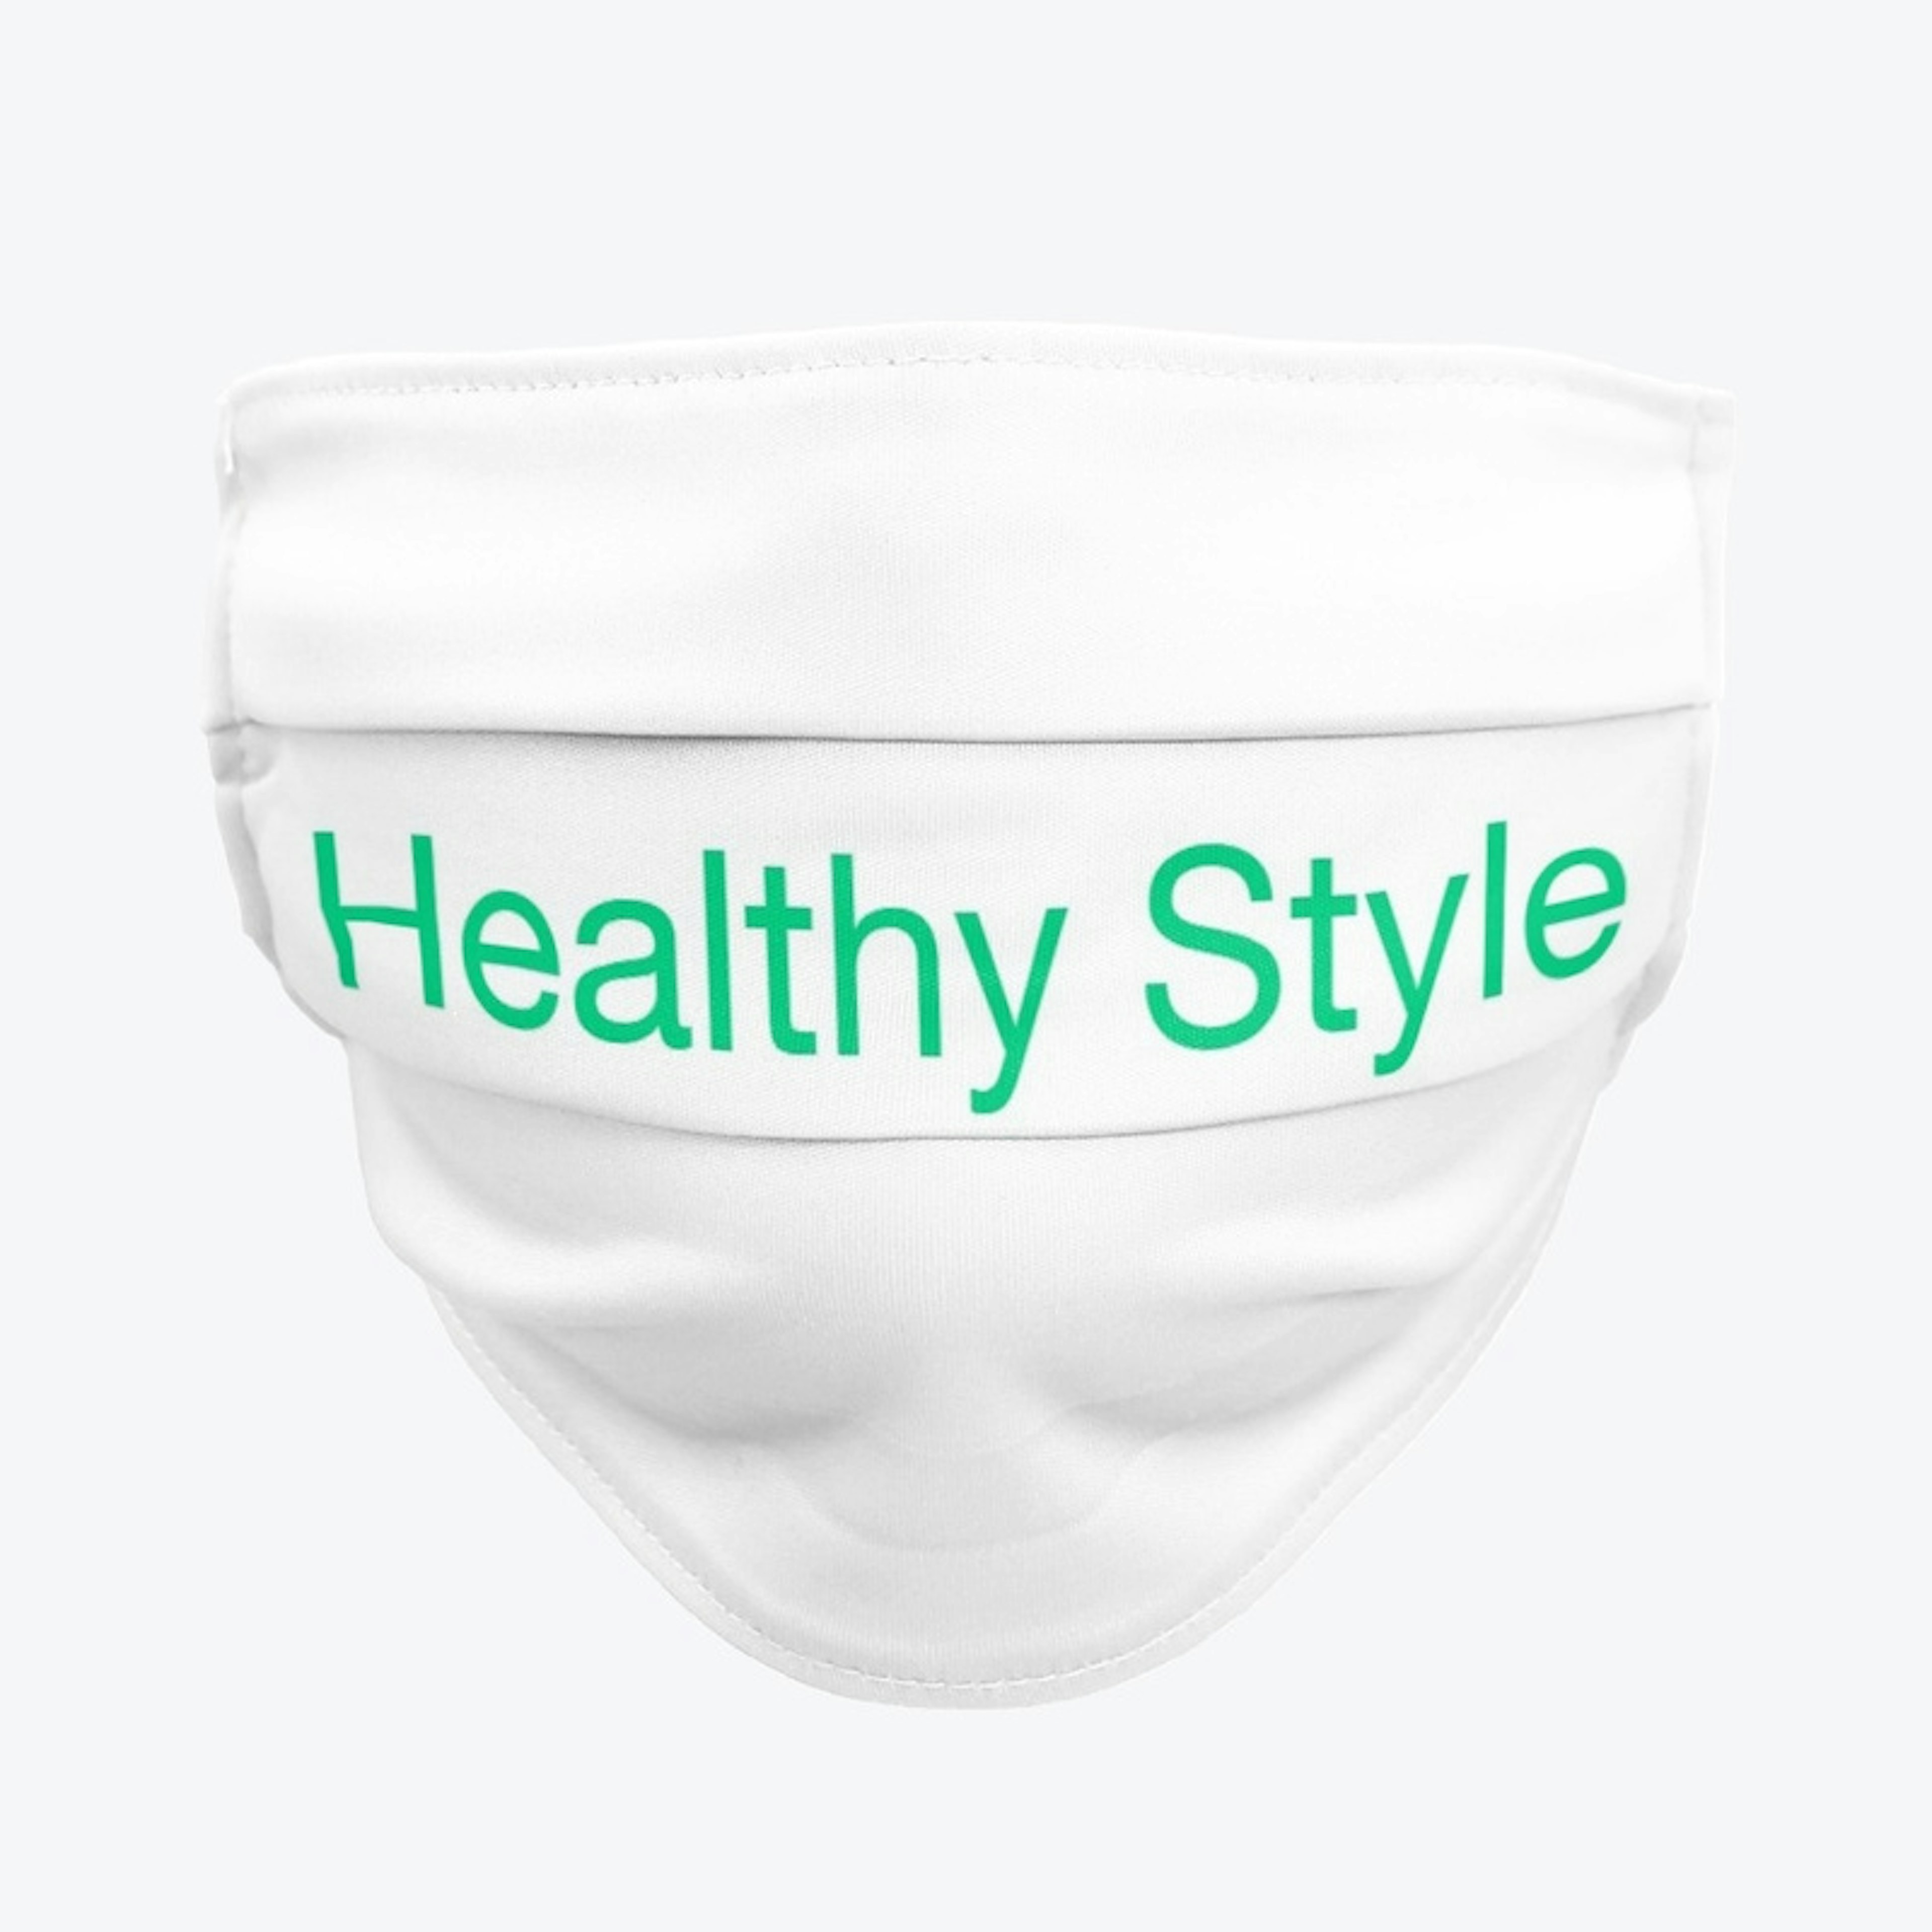 Healthy Style